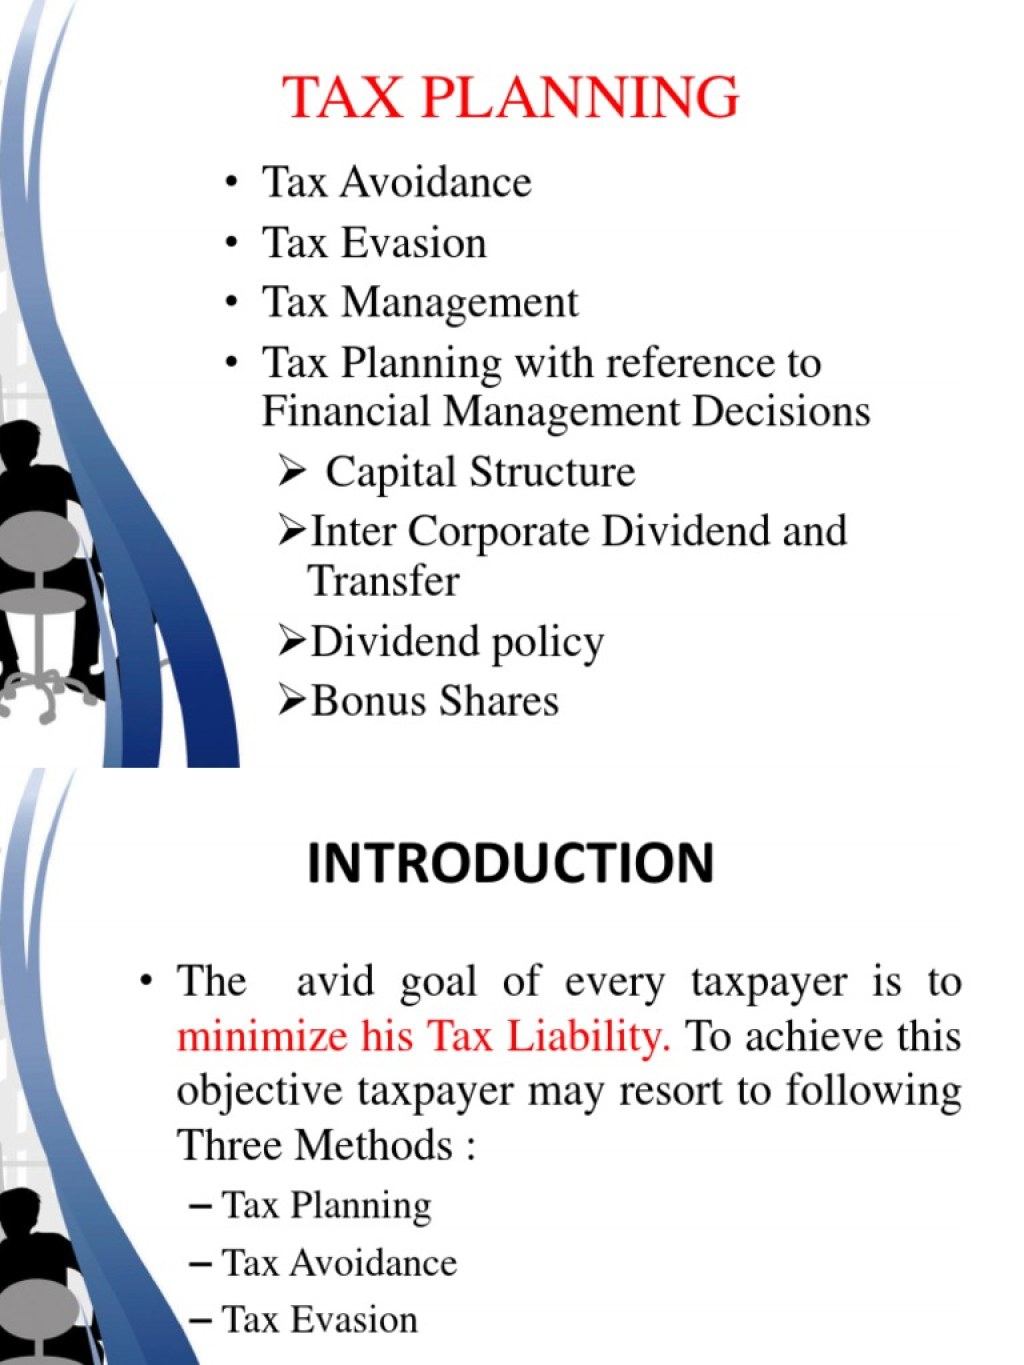 Picture of: Tax Planning  PDF  Tax Avoidance  Taxpayer